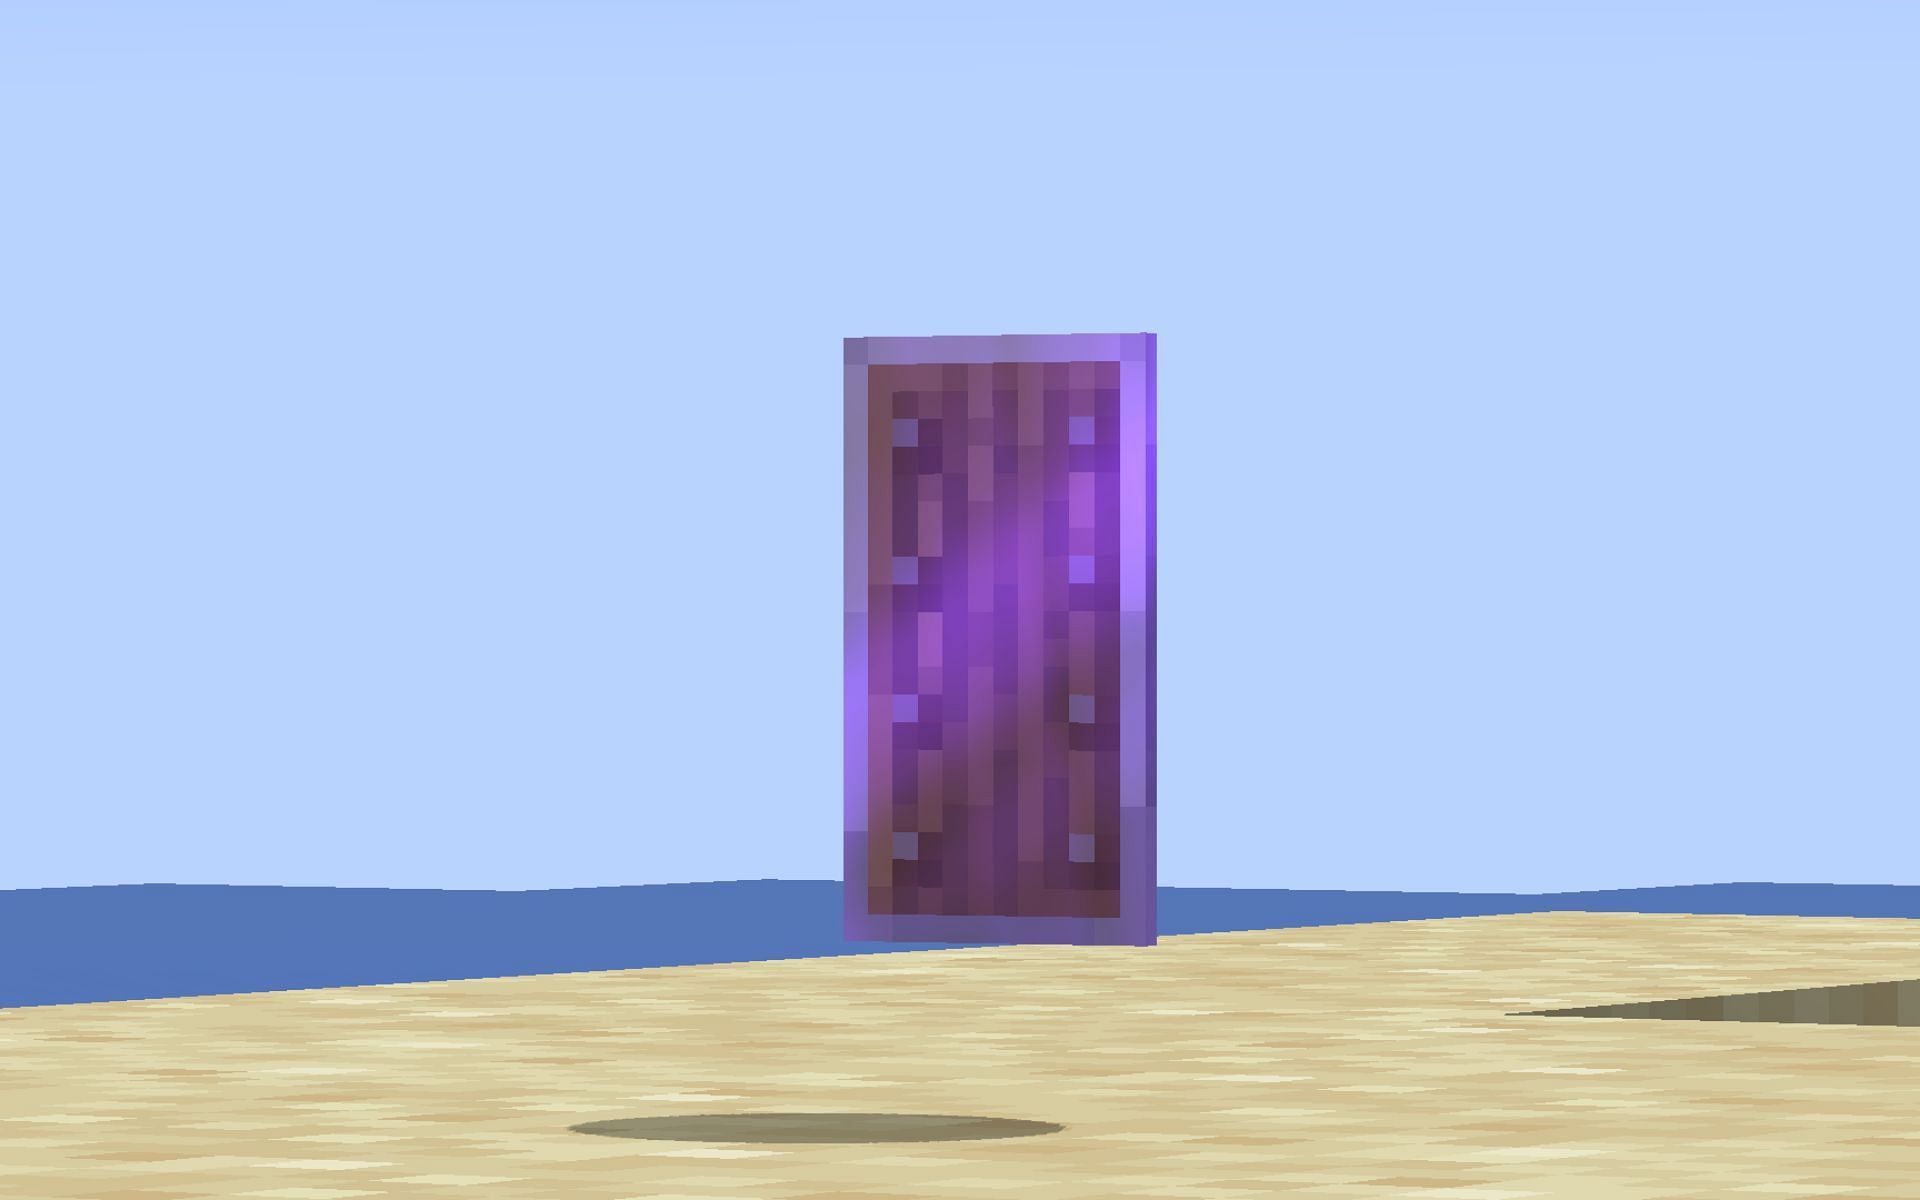 Shields are extremely useful while surviving against creeper explosions in Minecraft (Image via Mojang)